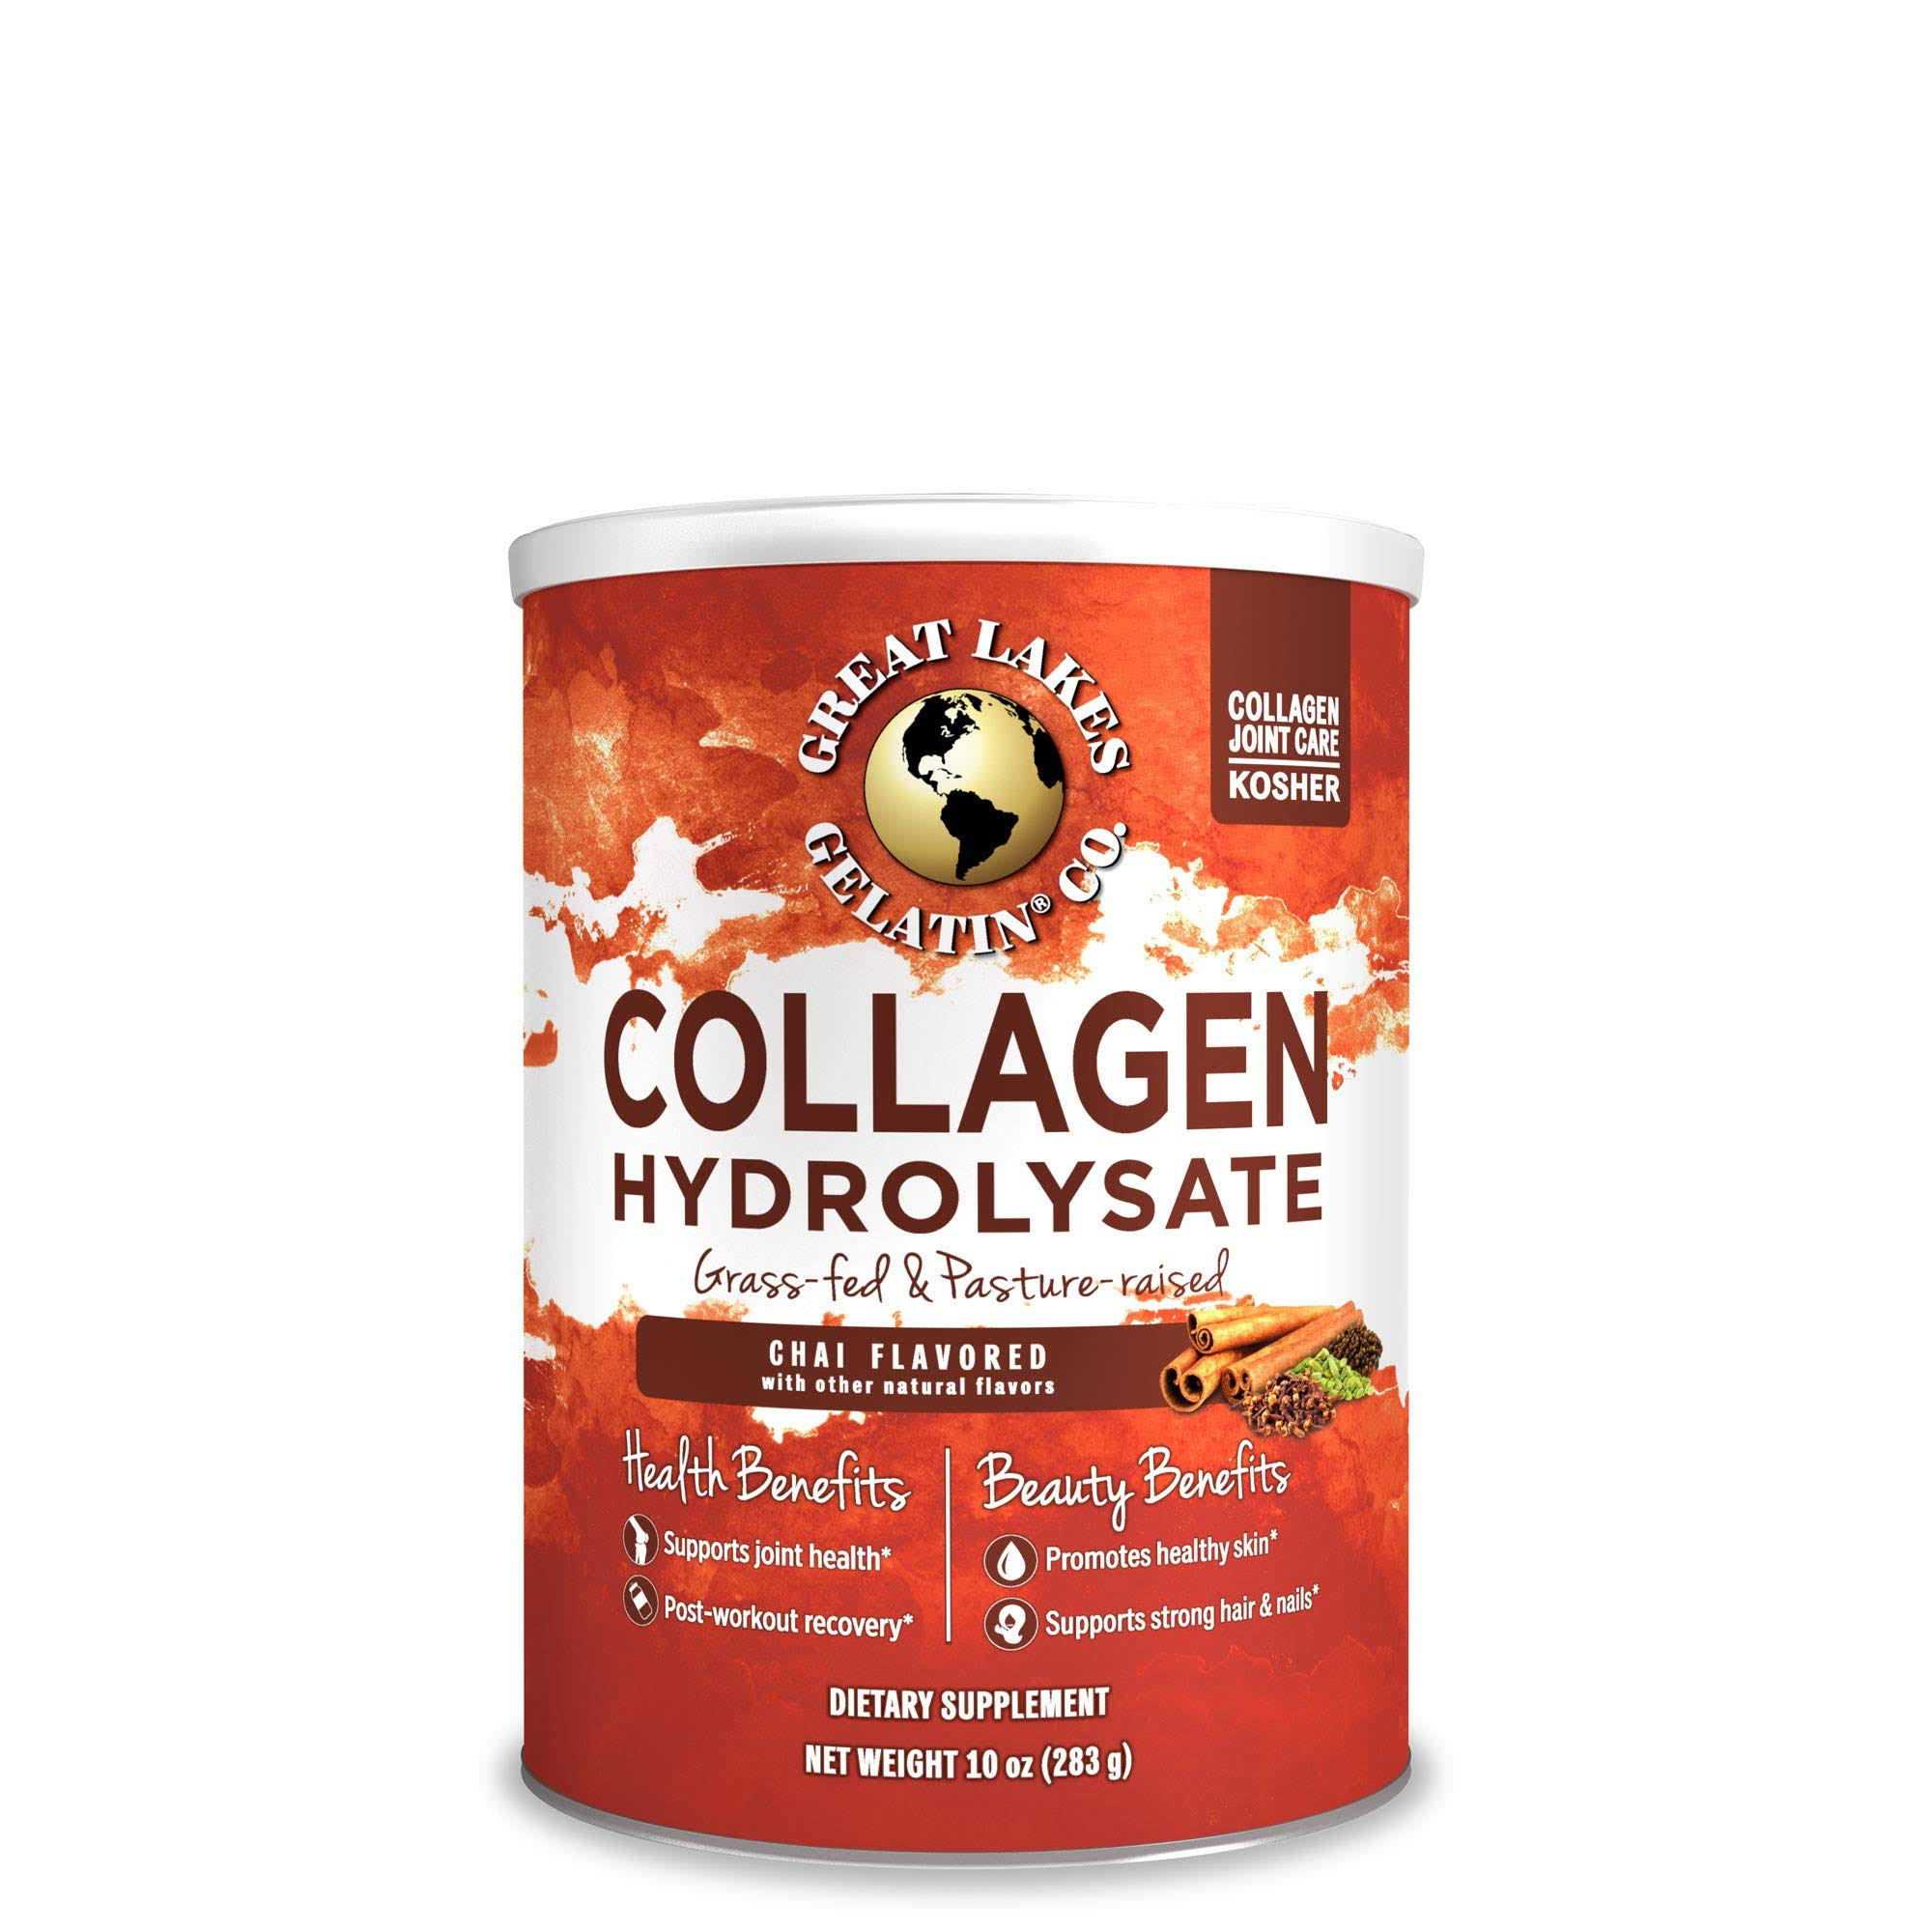 Great Lakes Wellness - Collagen Hydrolysate, Chai Flavored - 10 oz